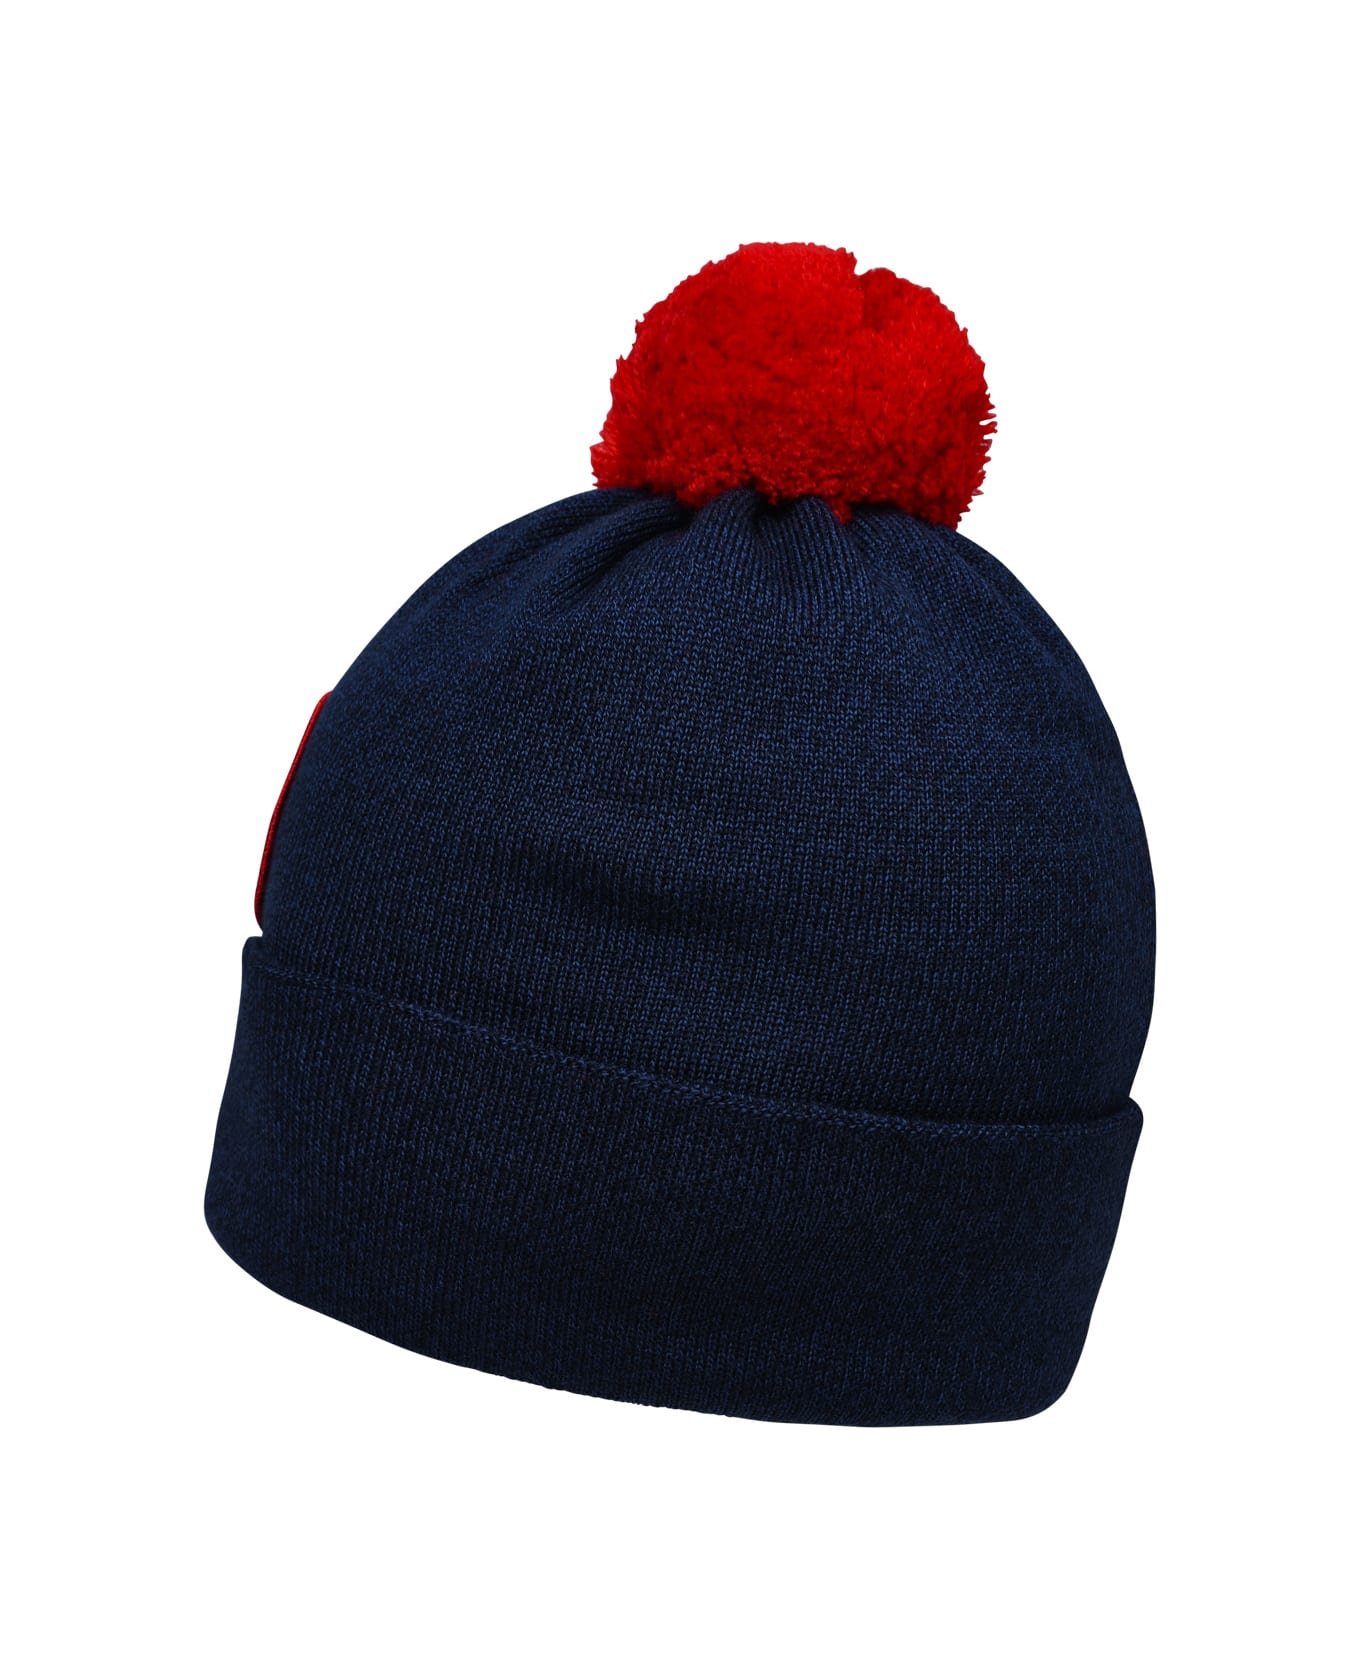 Canada Goose Blue Wool Beanie - Navy アクセサリー＆ギフト